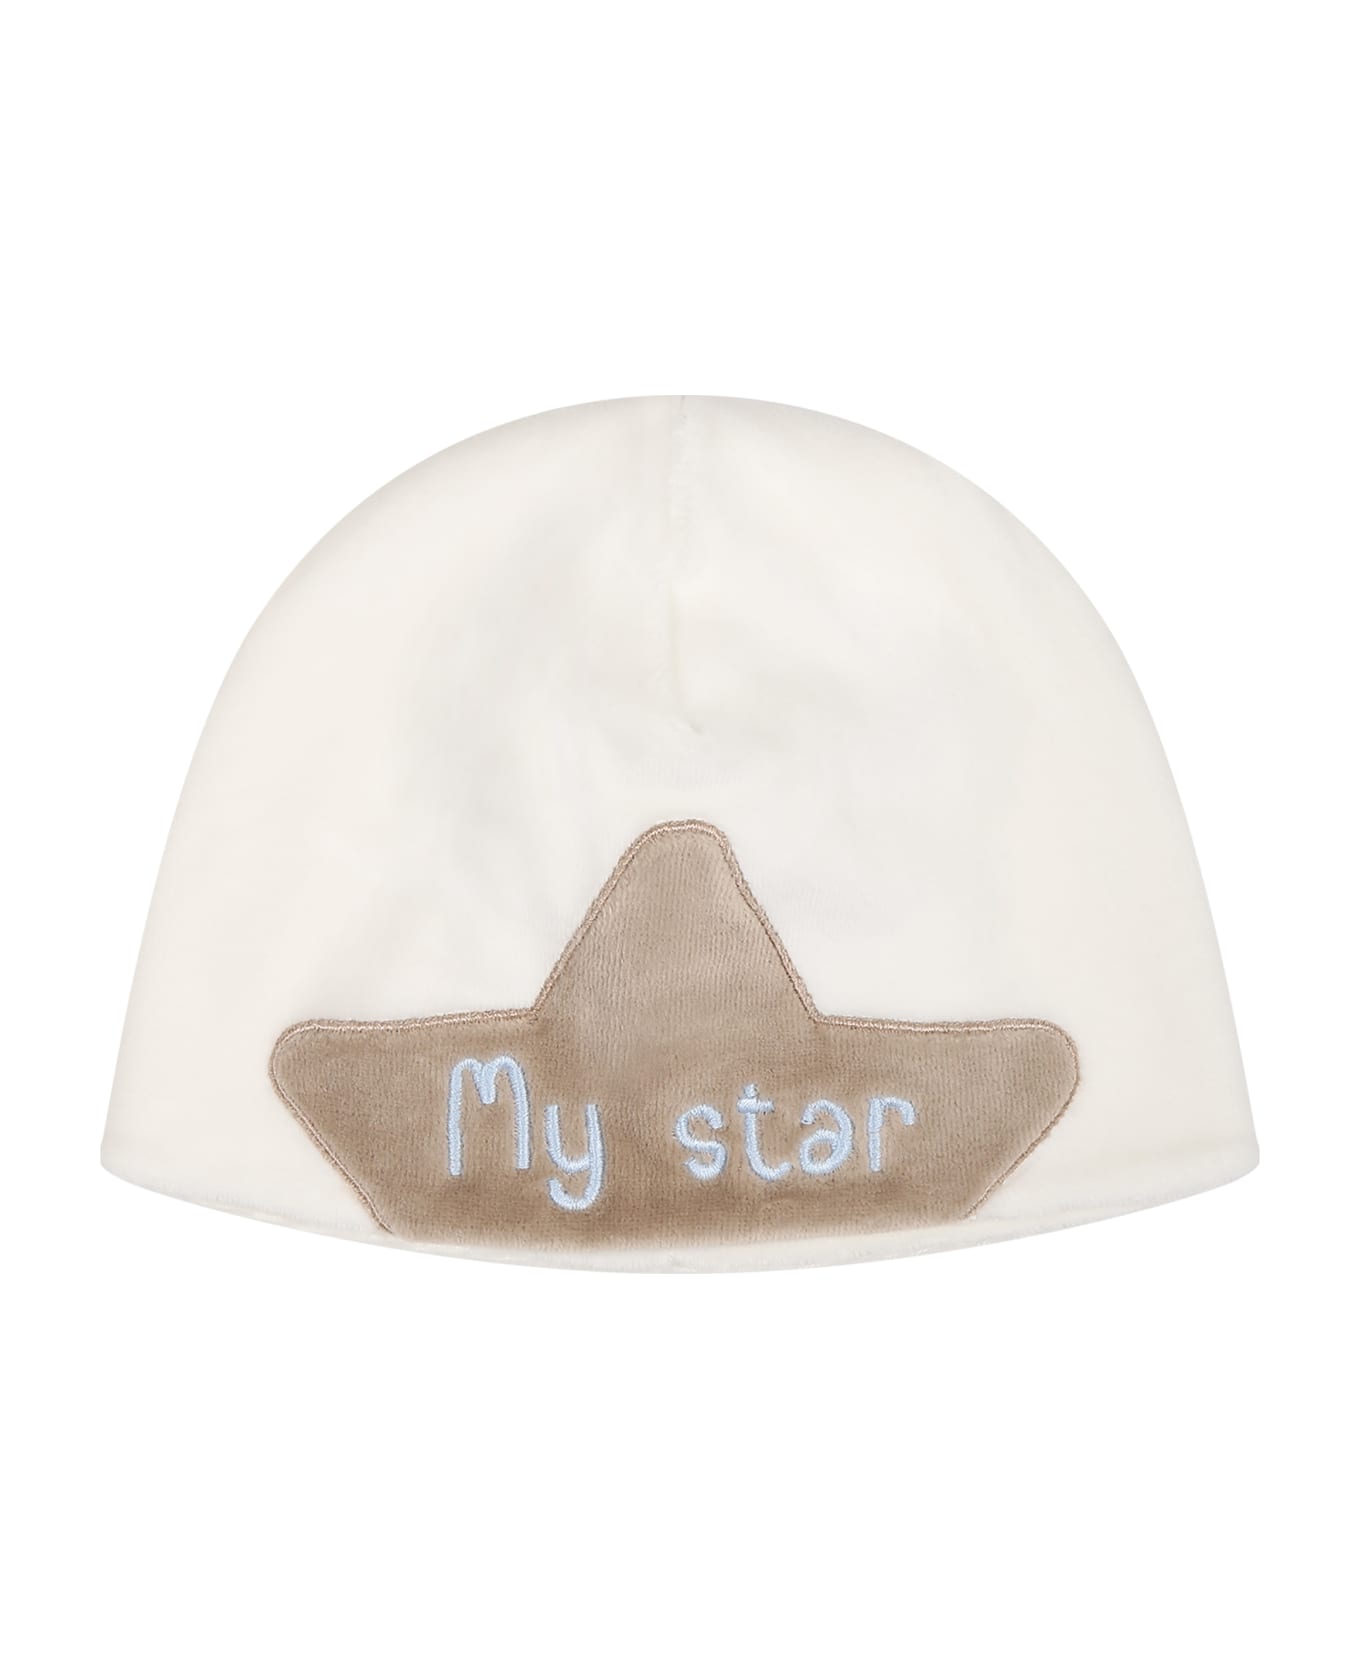 La stupenderia White Hat For Baby Boy With Star - White アクセサリー＆ギフト